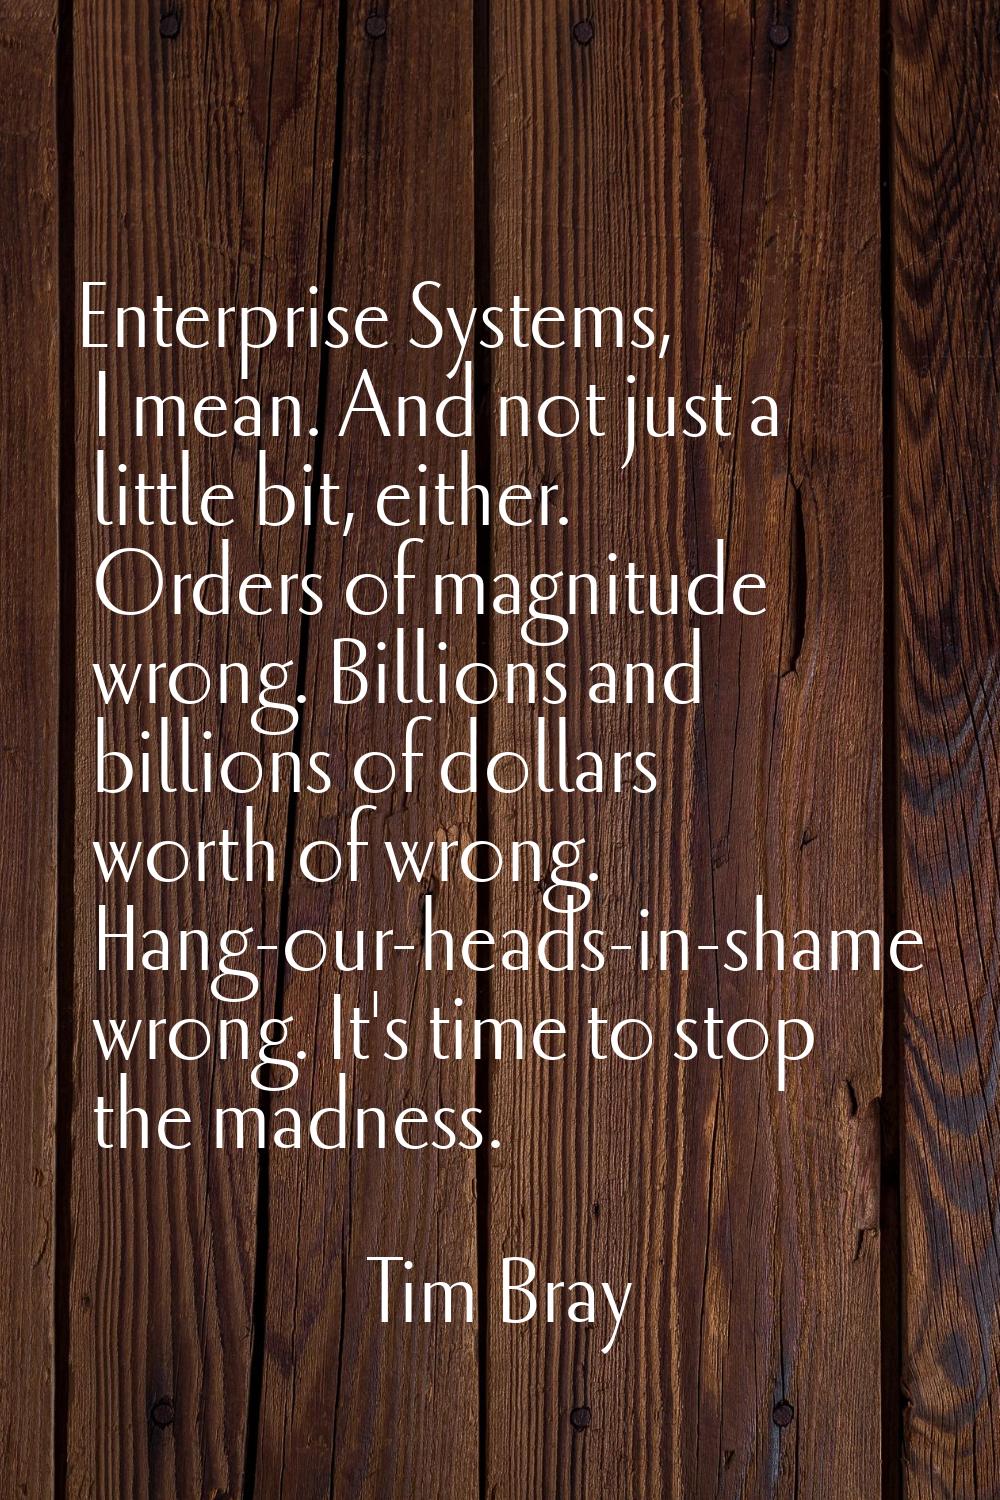 Enterprise Systems, I mean. And not just a little bit, either. Orders of magnitude wrong. Billions 